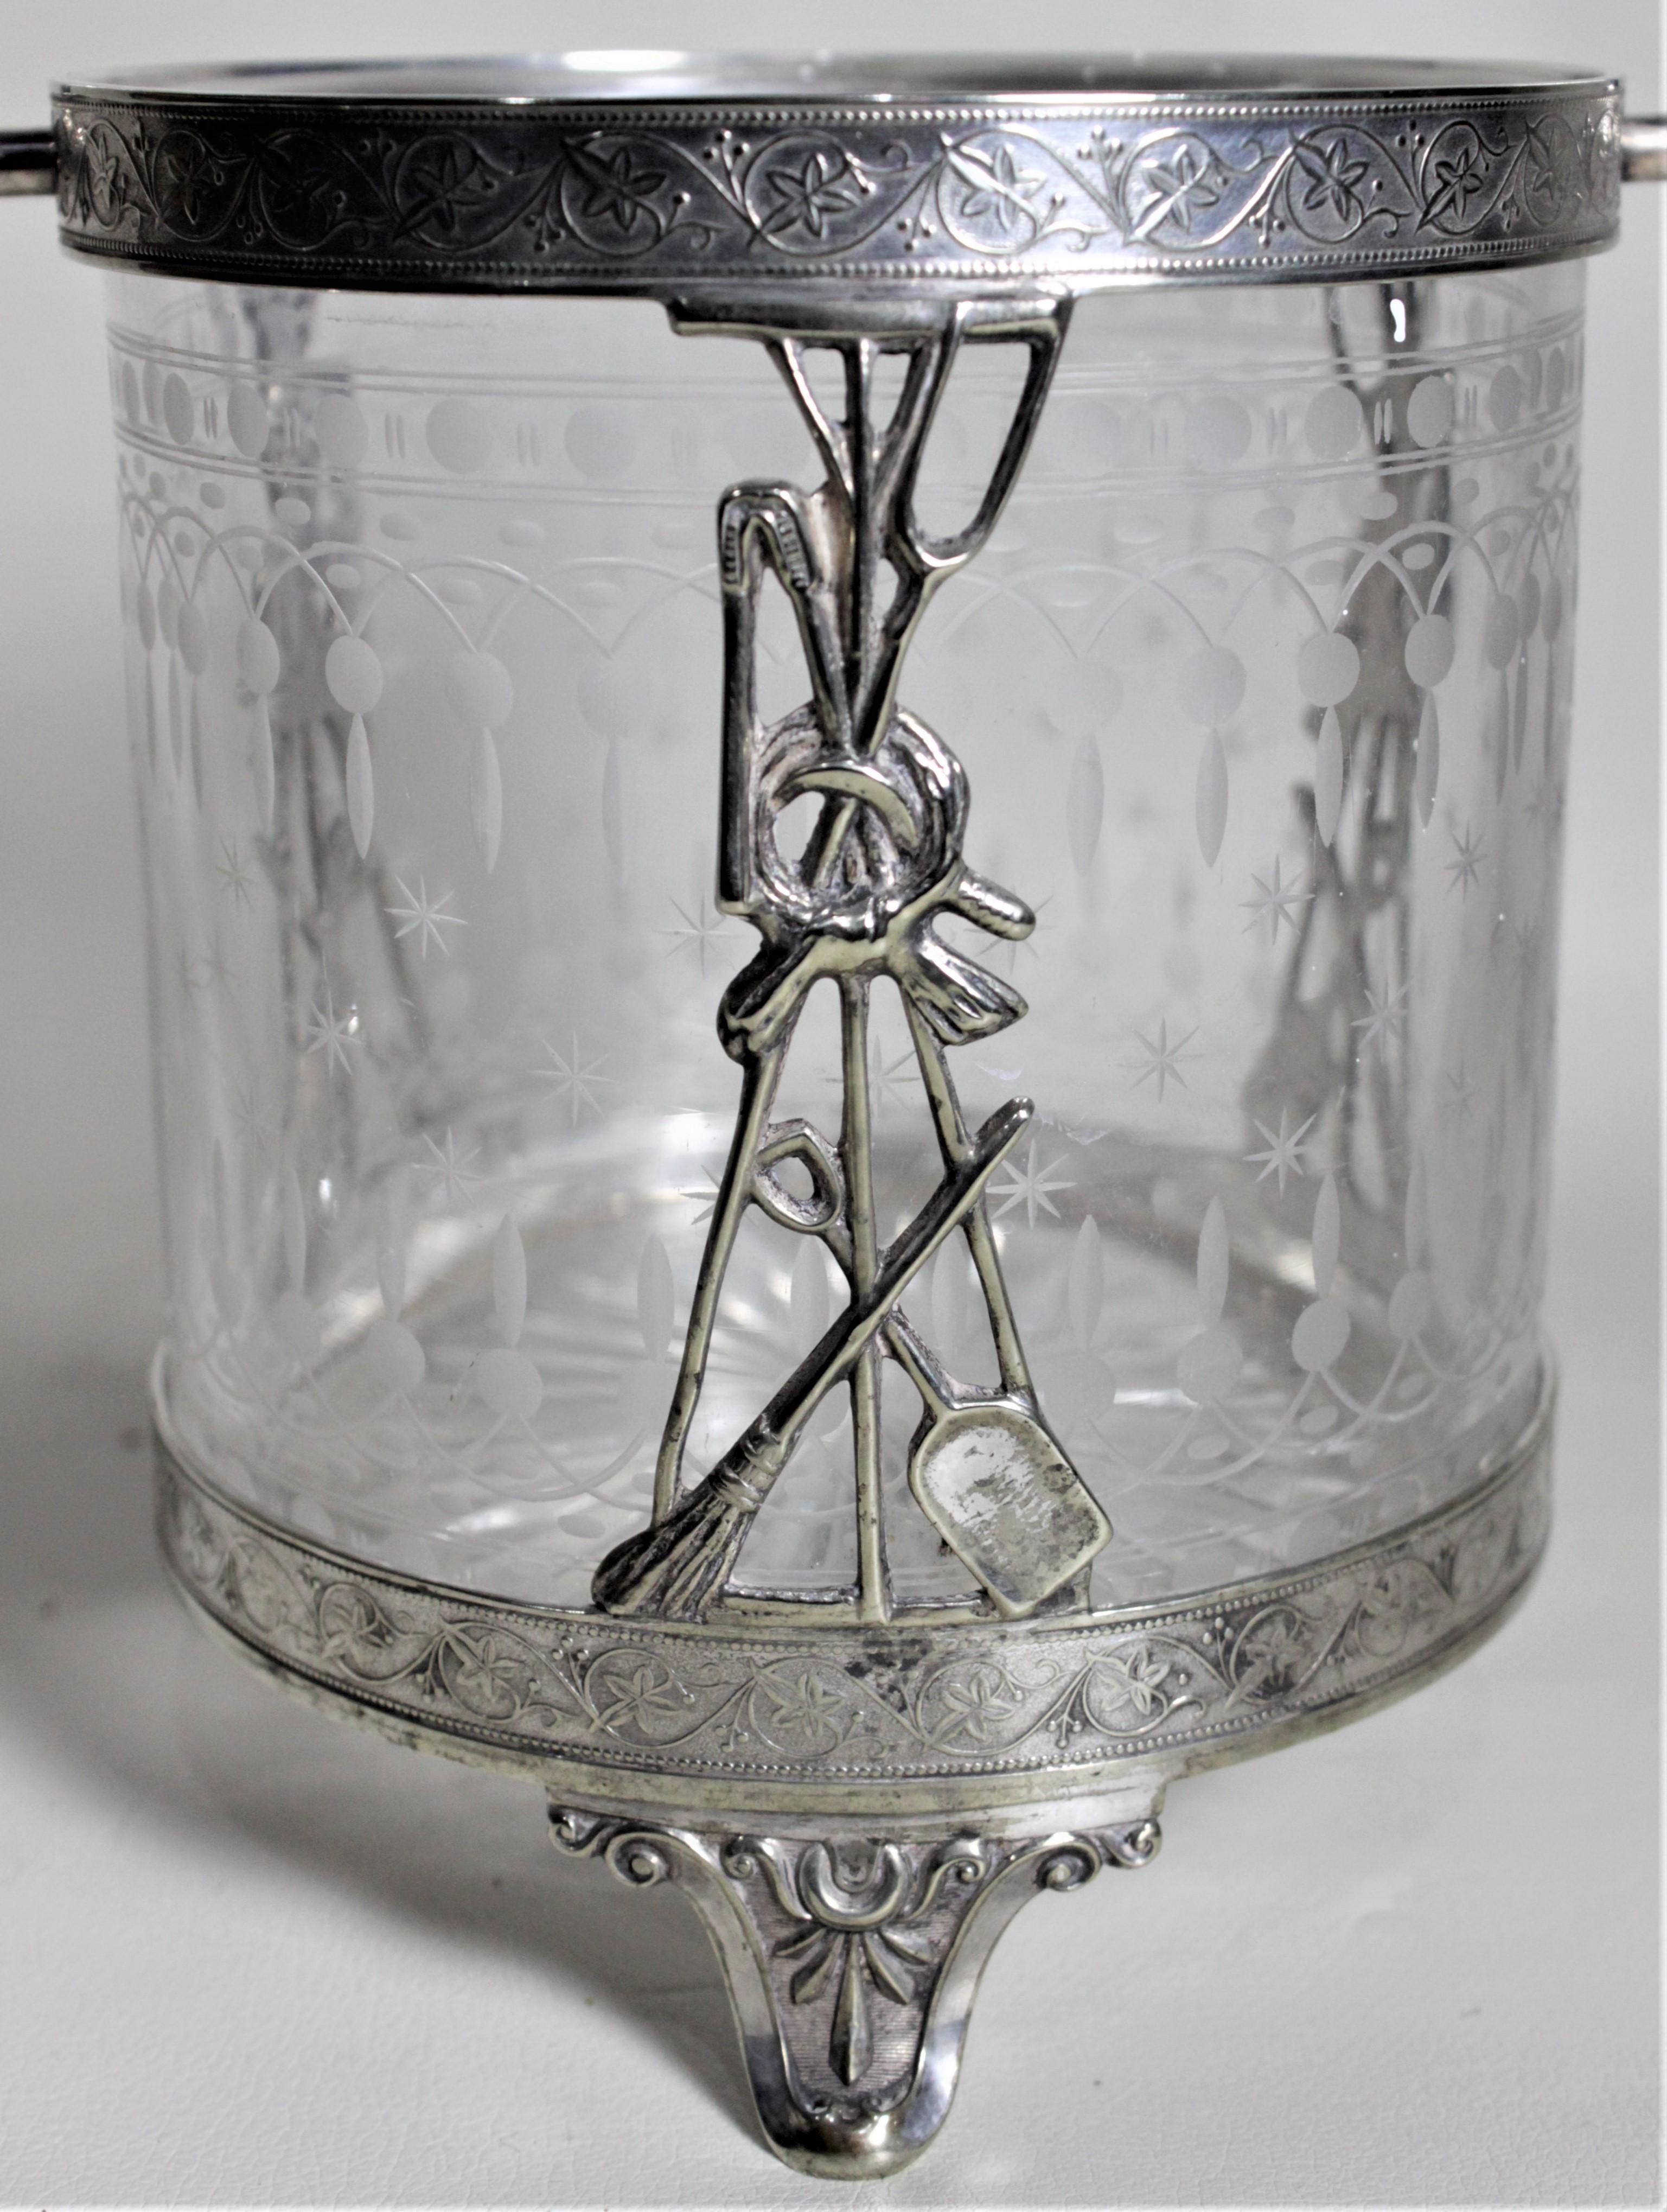 Antique Silver Plated Biscuit Barrel with Figural Decor & Etched Glass Insert 7